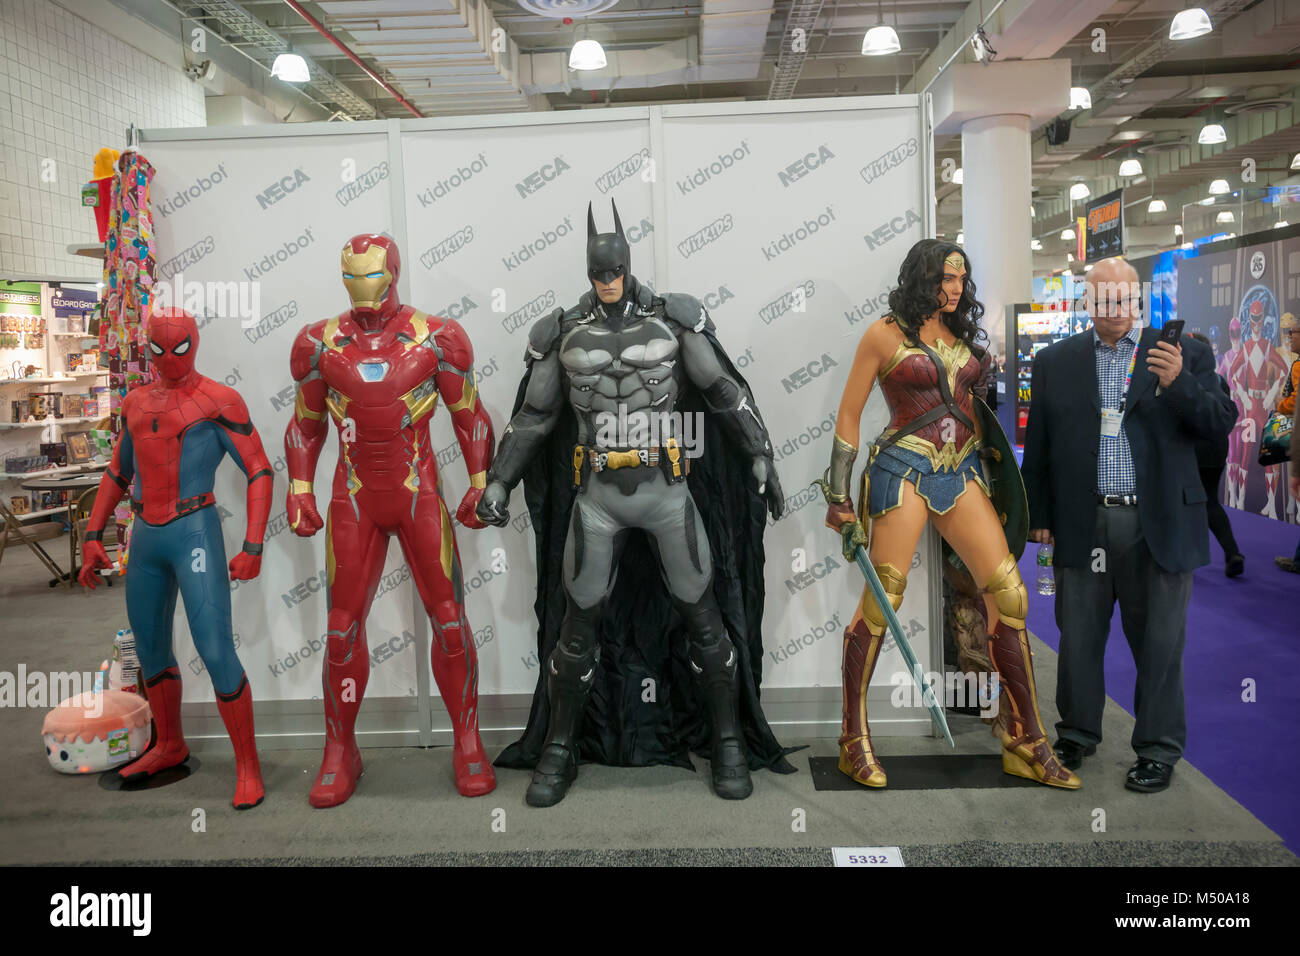 New York, USA. 19th February, 2018. Life-size action figures on display at  115th North American International Toy Fair in the Jacob Javits Convention  center in New York on Monday, February 19, 2018.